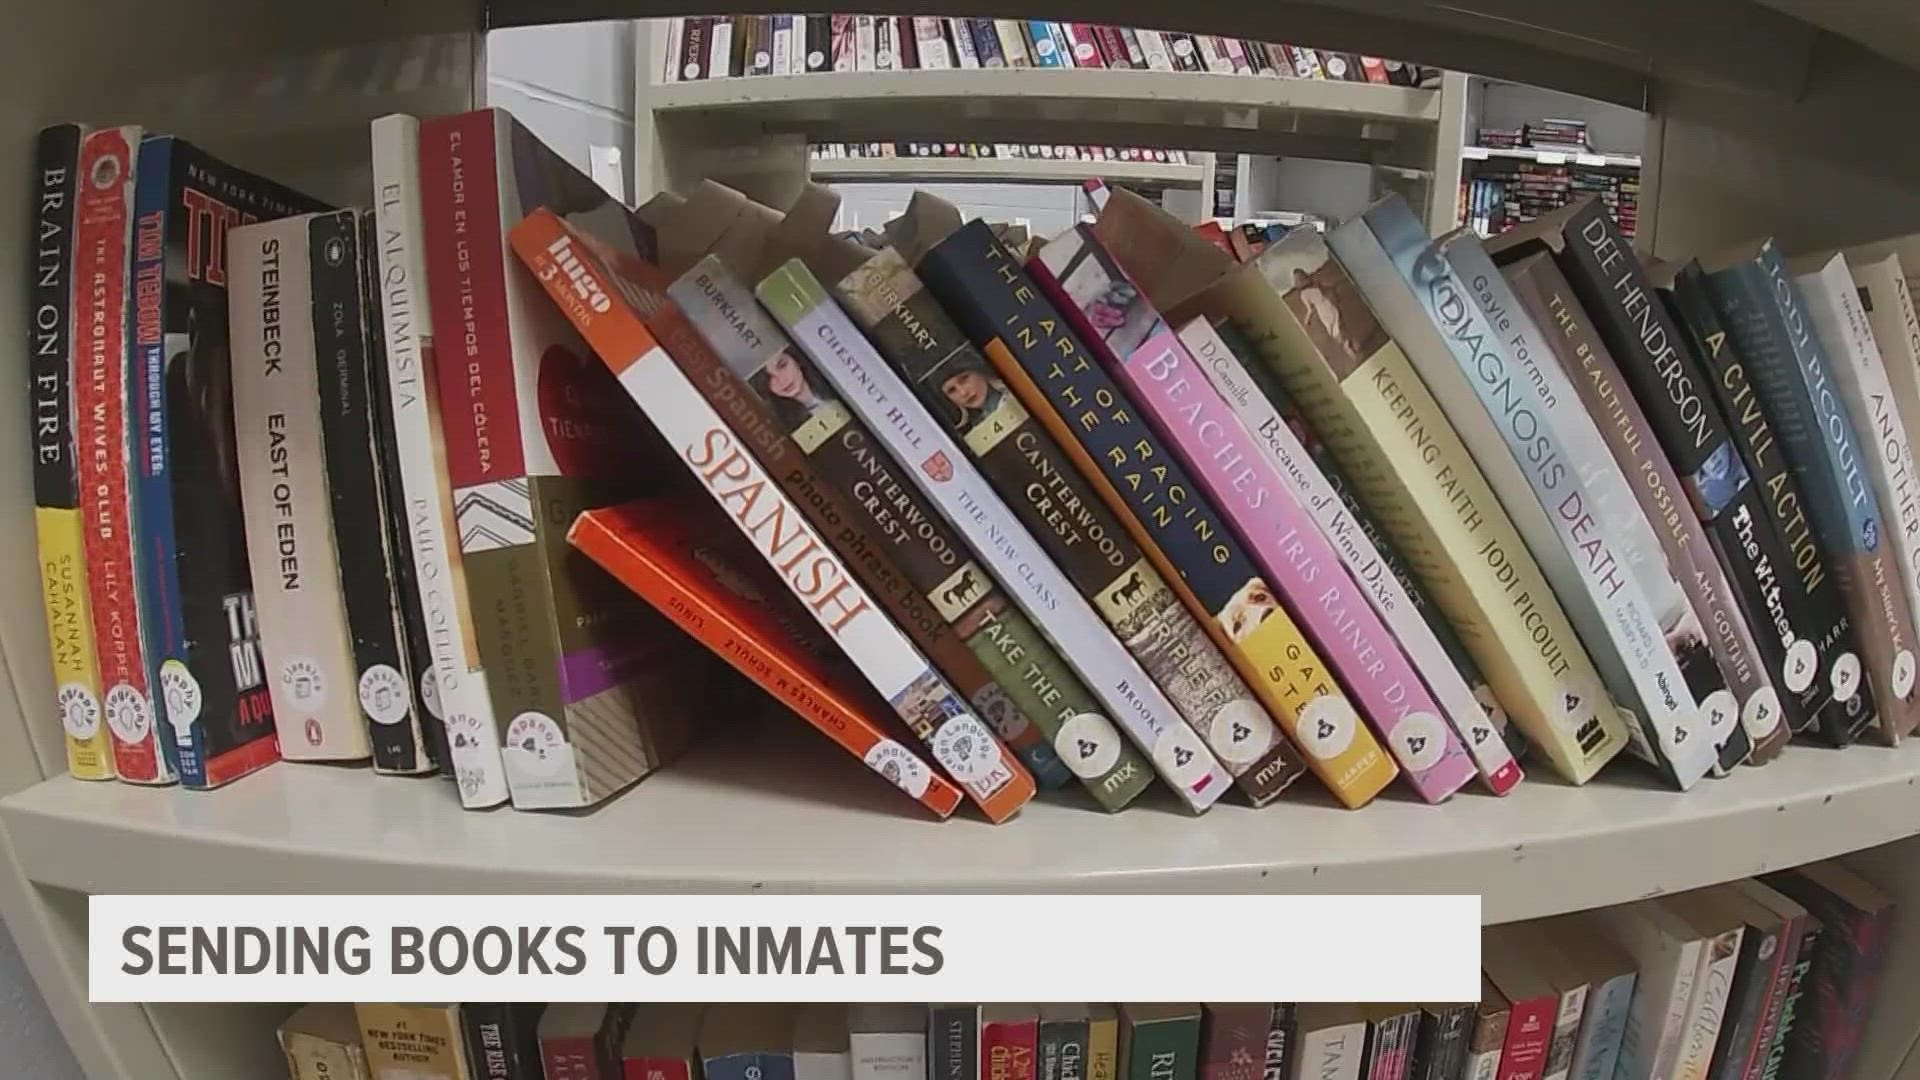 A couple from Dallas Center started sending books to inmates as part of their service project. They wanted to do this as a way to show those inmates someone cares.